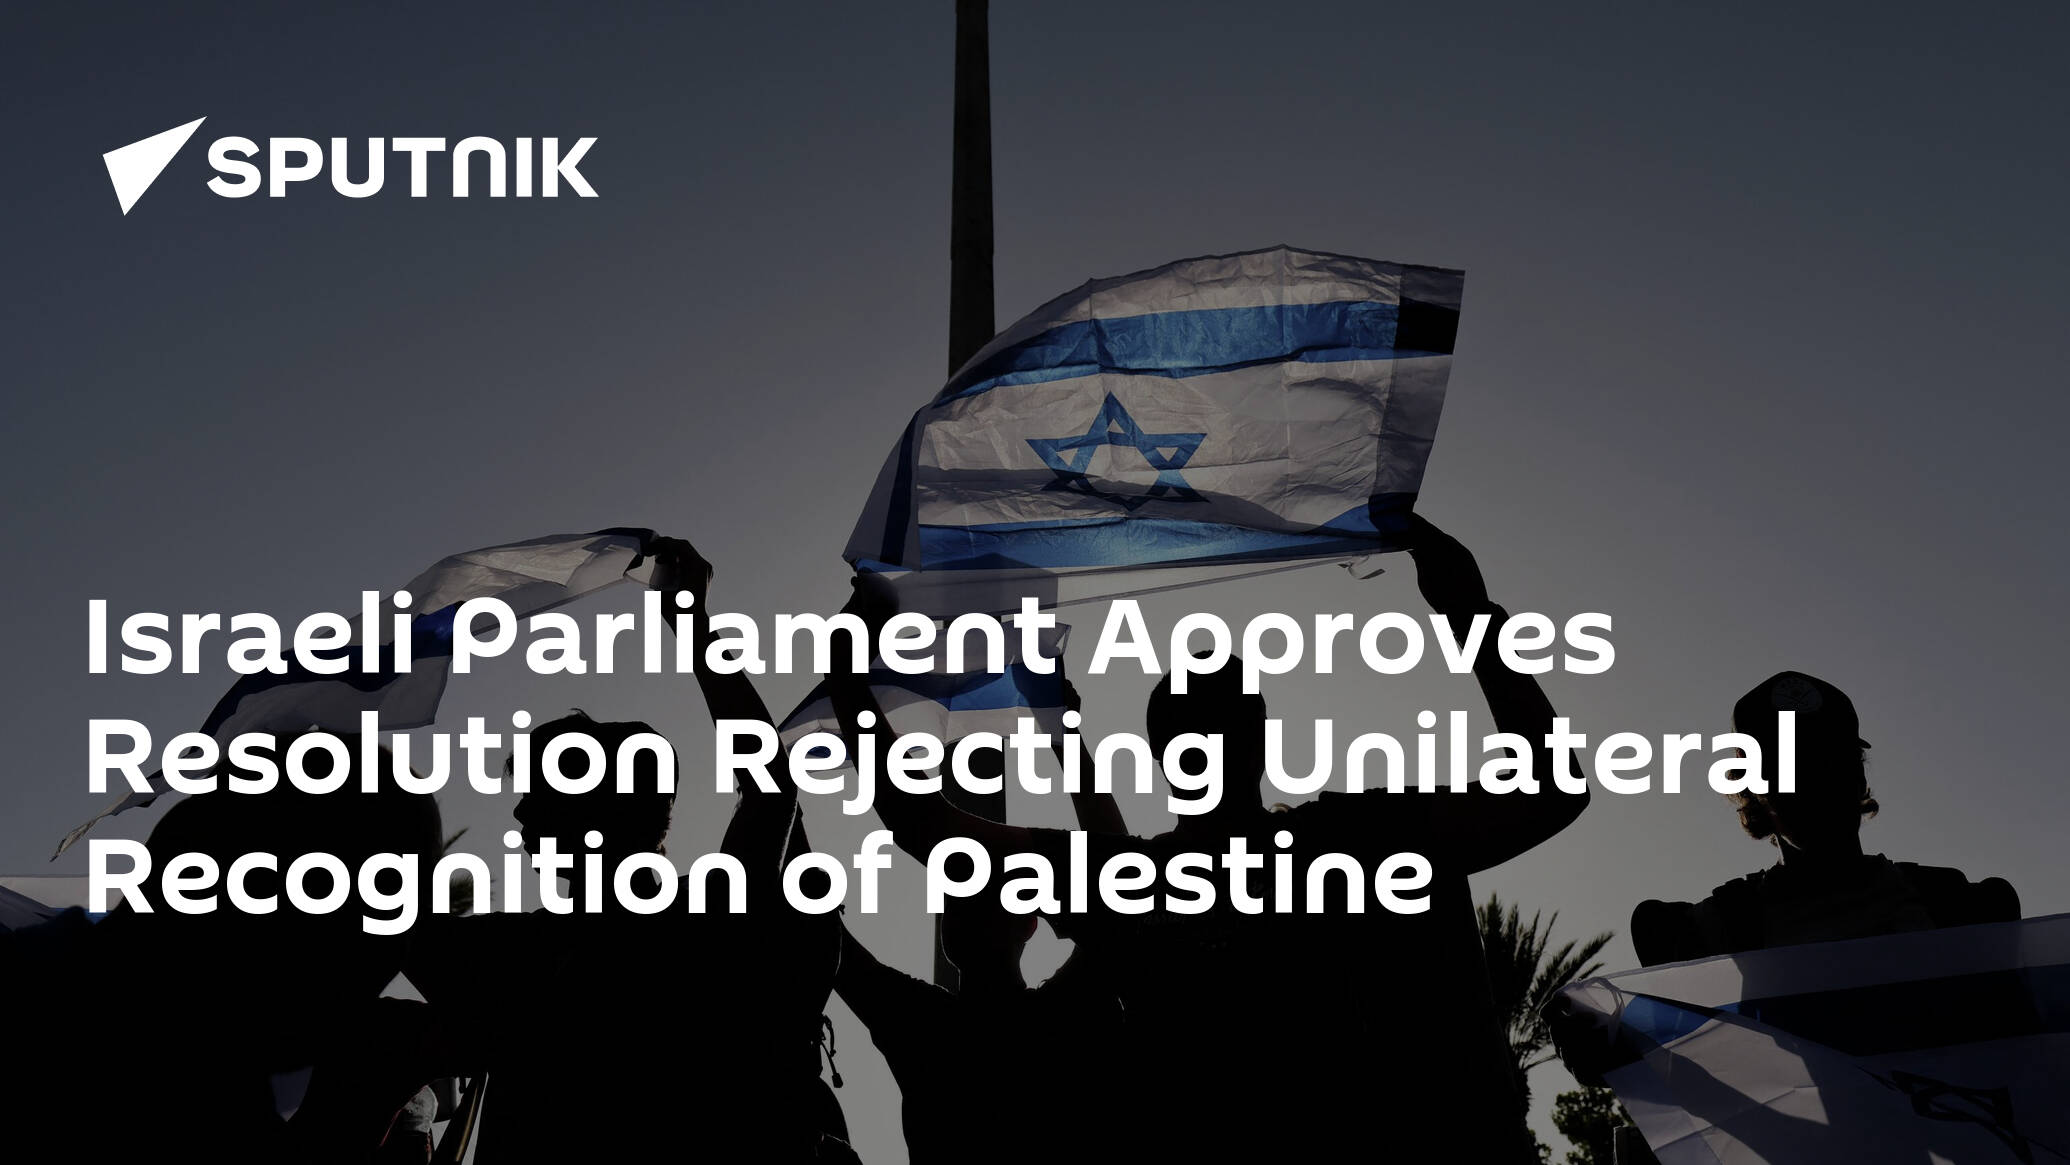 Israeli Parliament Approves Resolution Rejecting Unilateral Recognition of Palestine